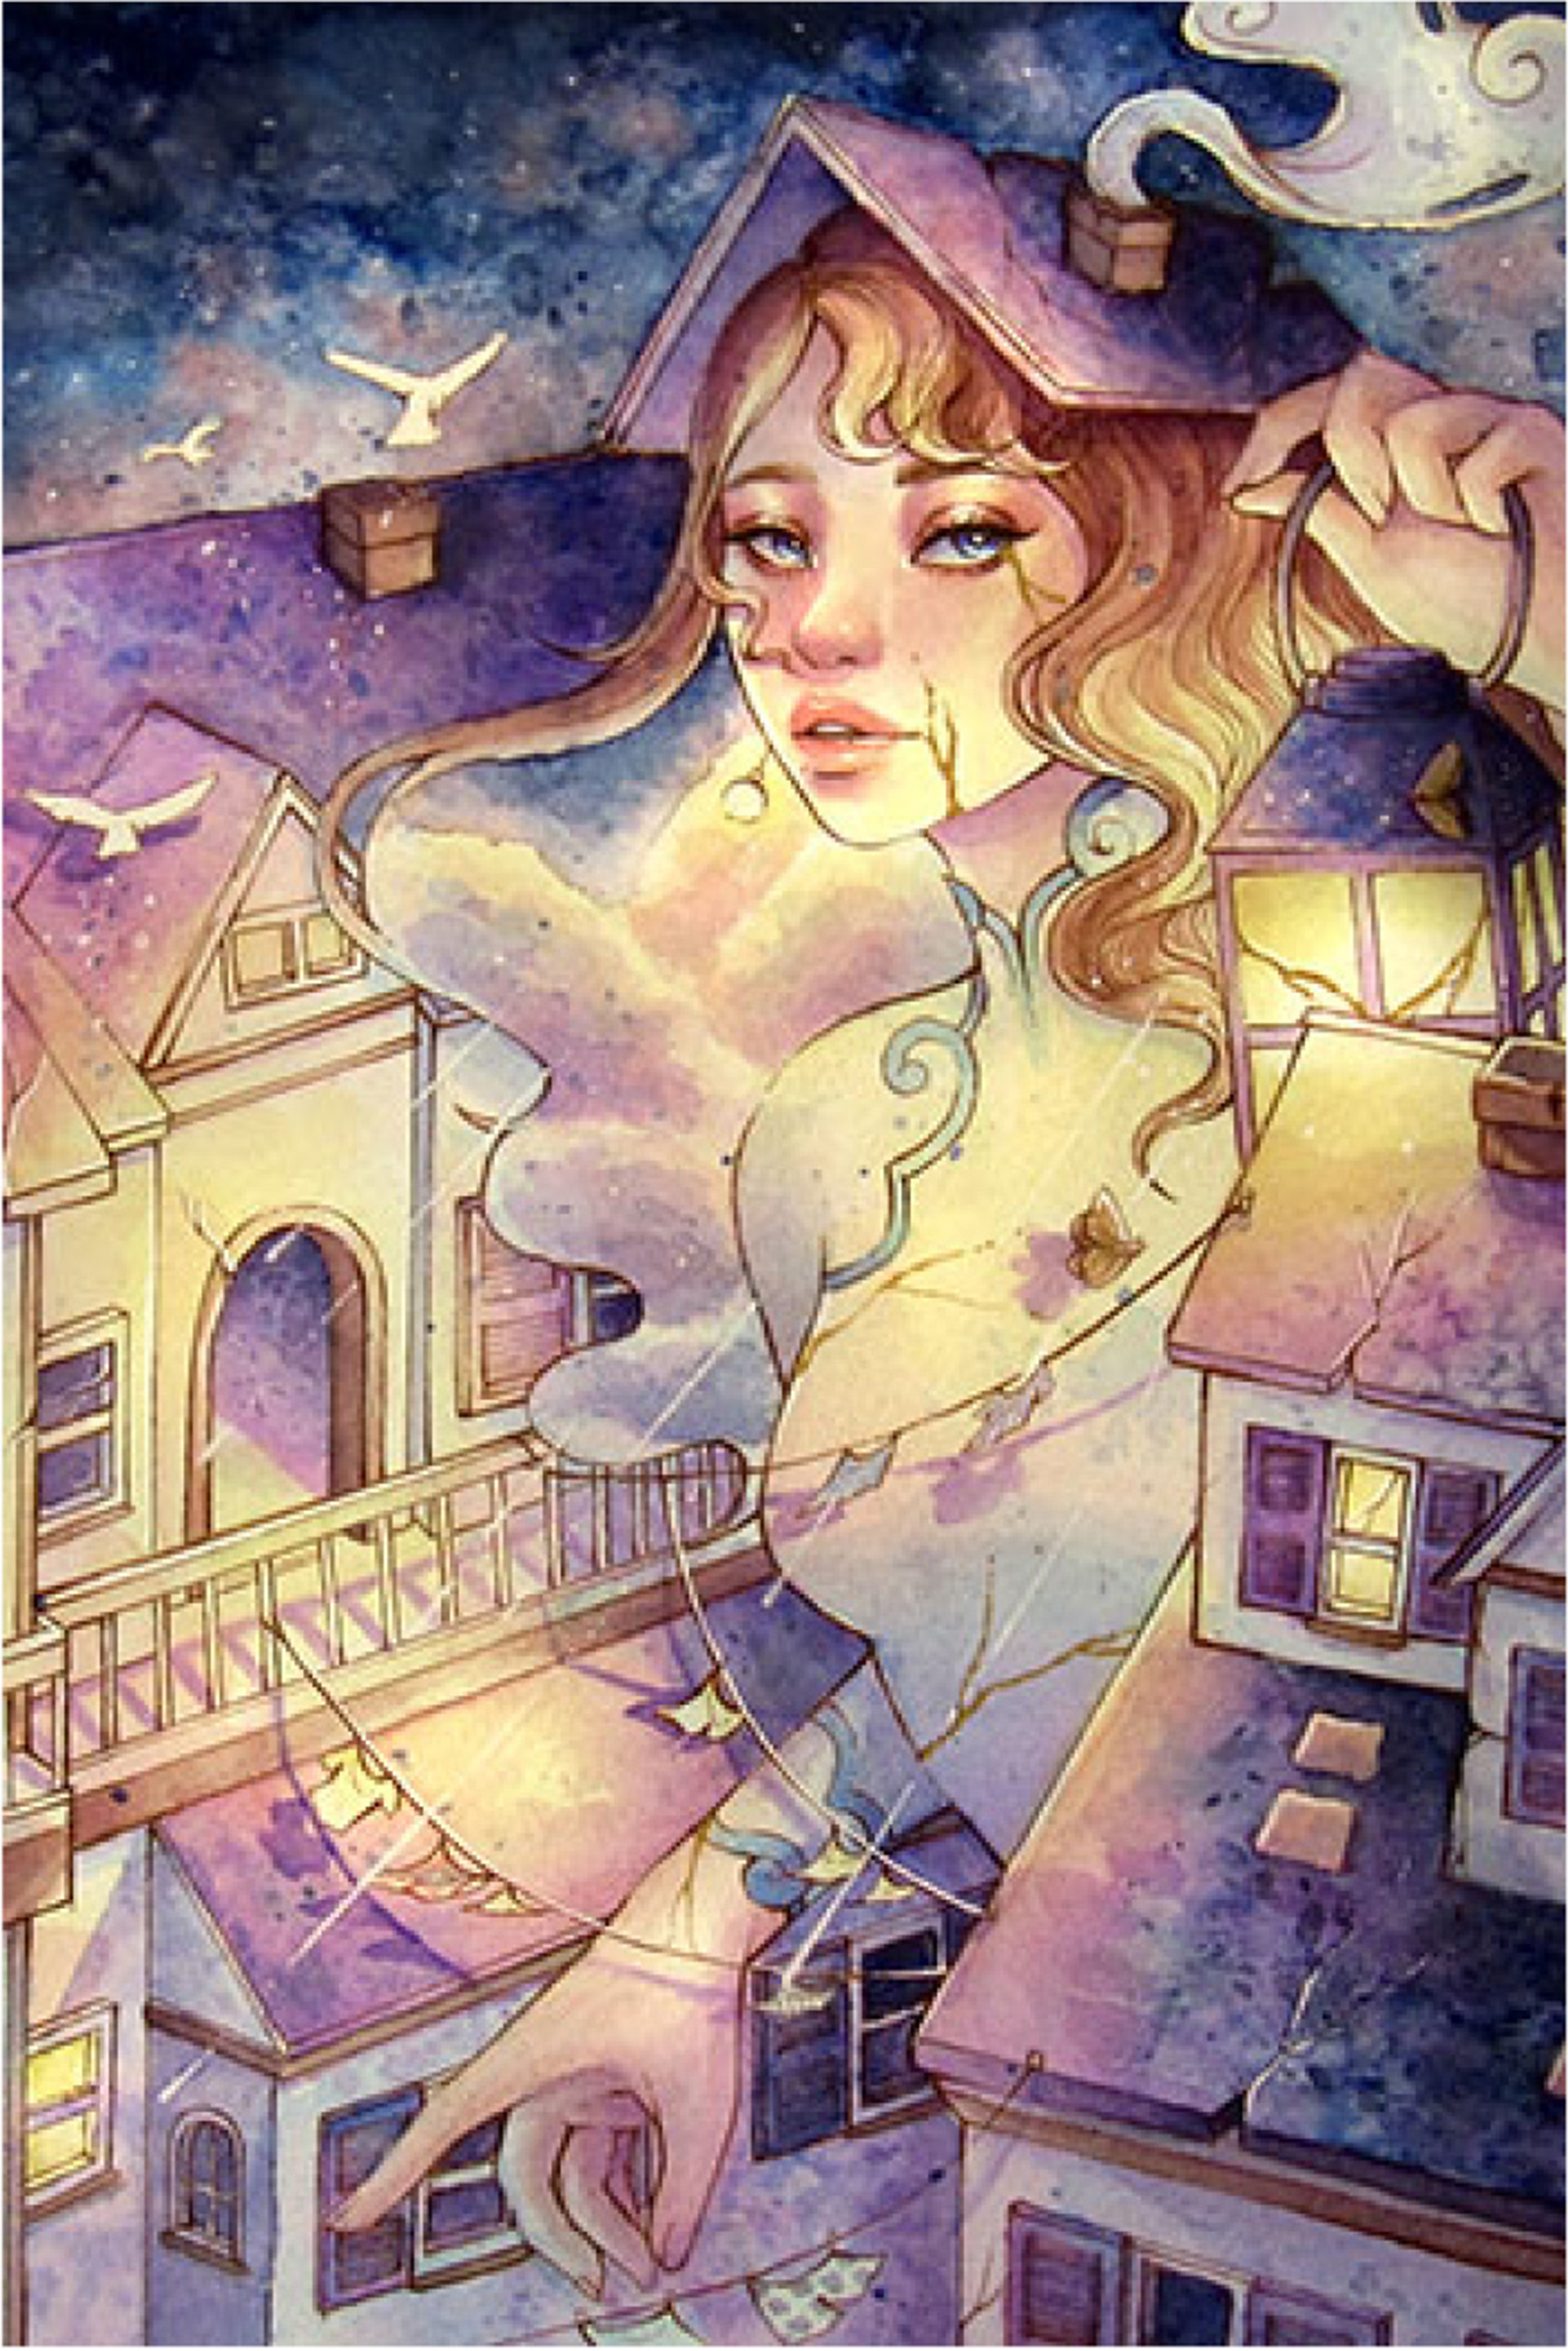 Painting of a young woman, as tall as a house, walking through streets at night